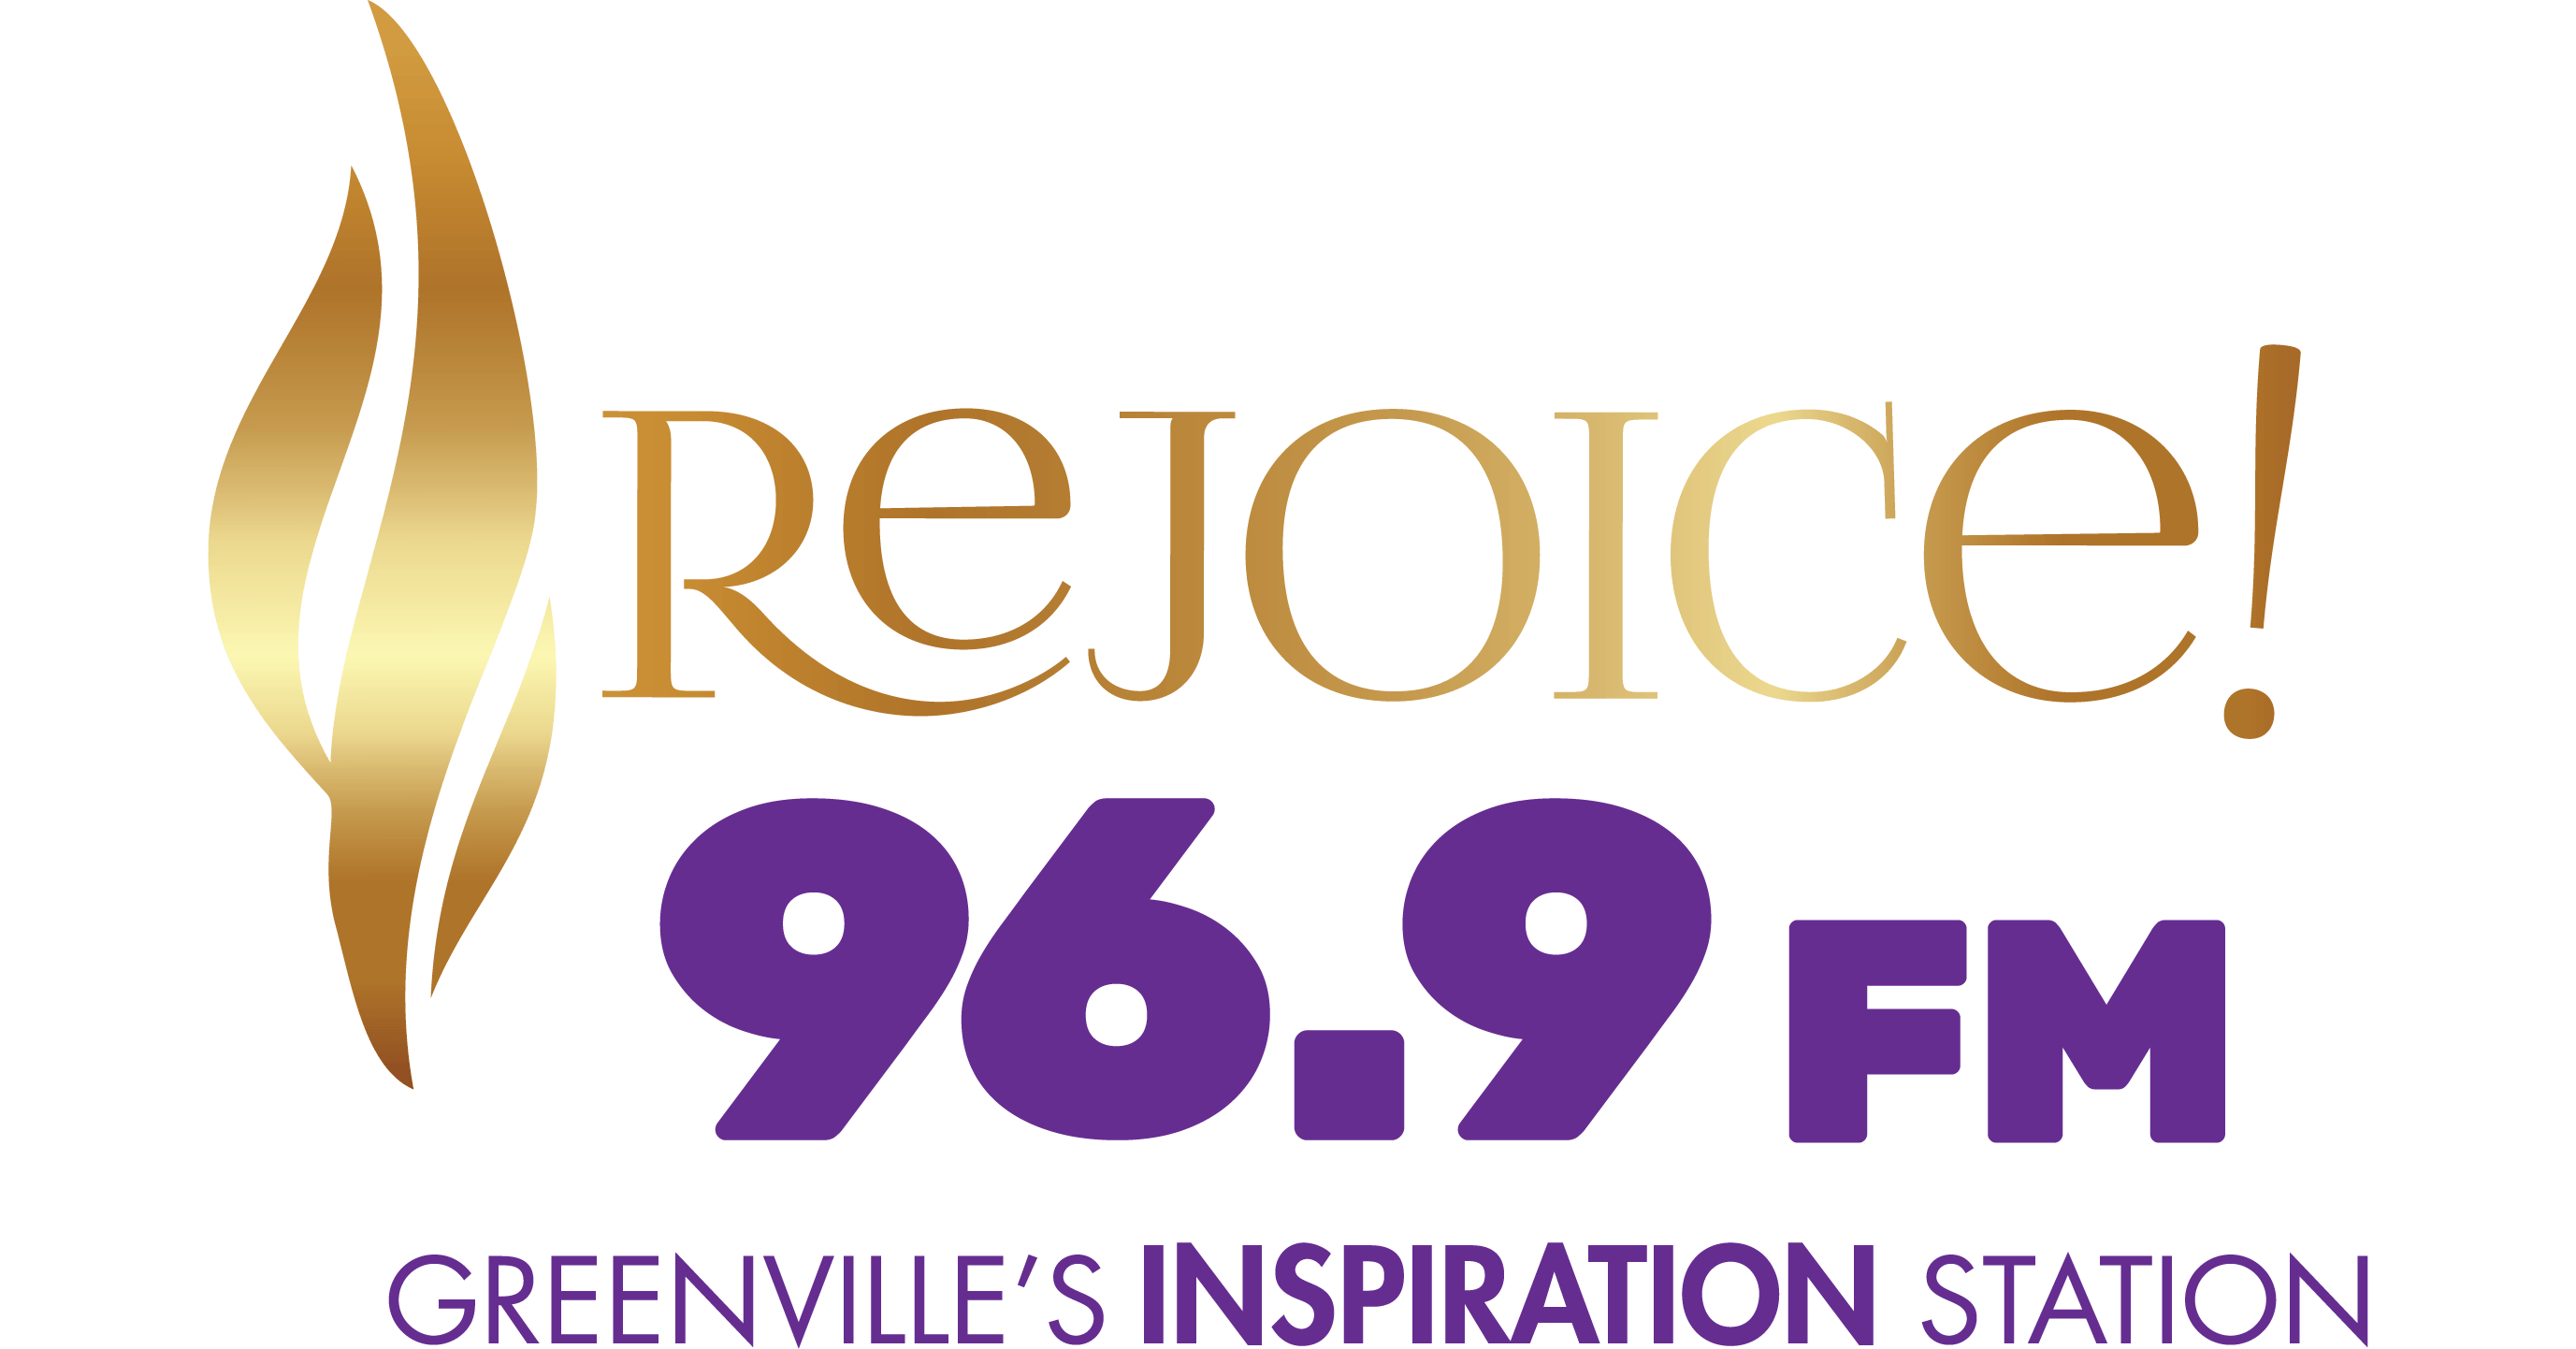 Persevering Logo - Persevering to the End - Integrity Moments - July 17 | Rejoice! 96.9 ...